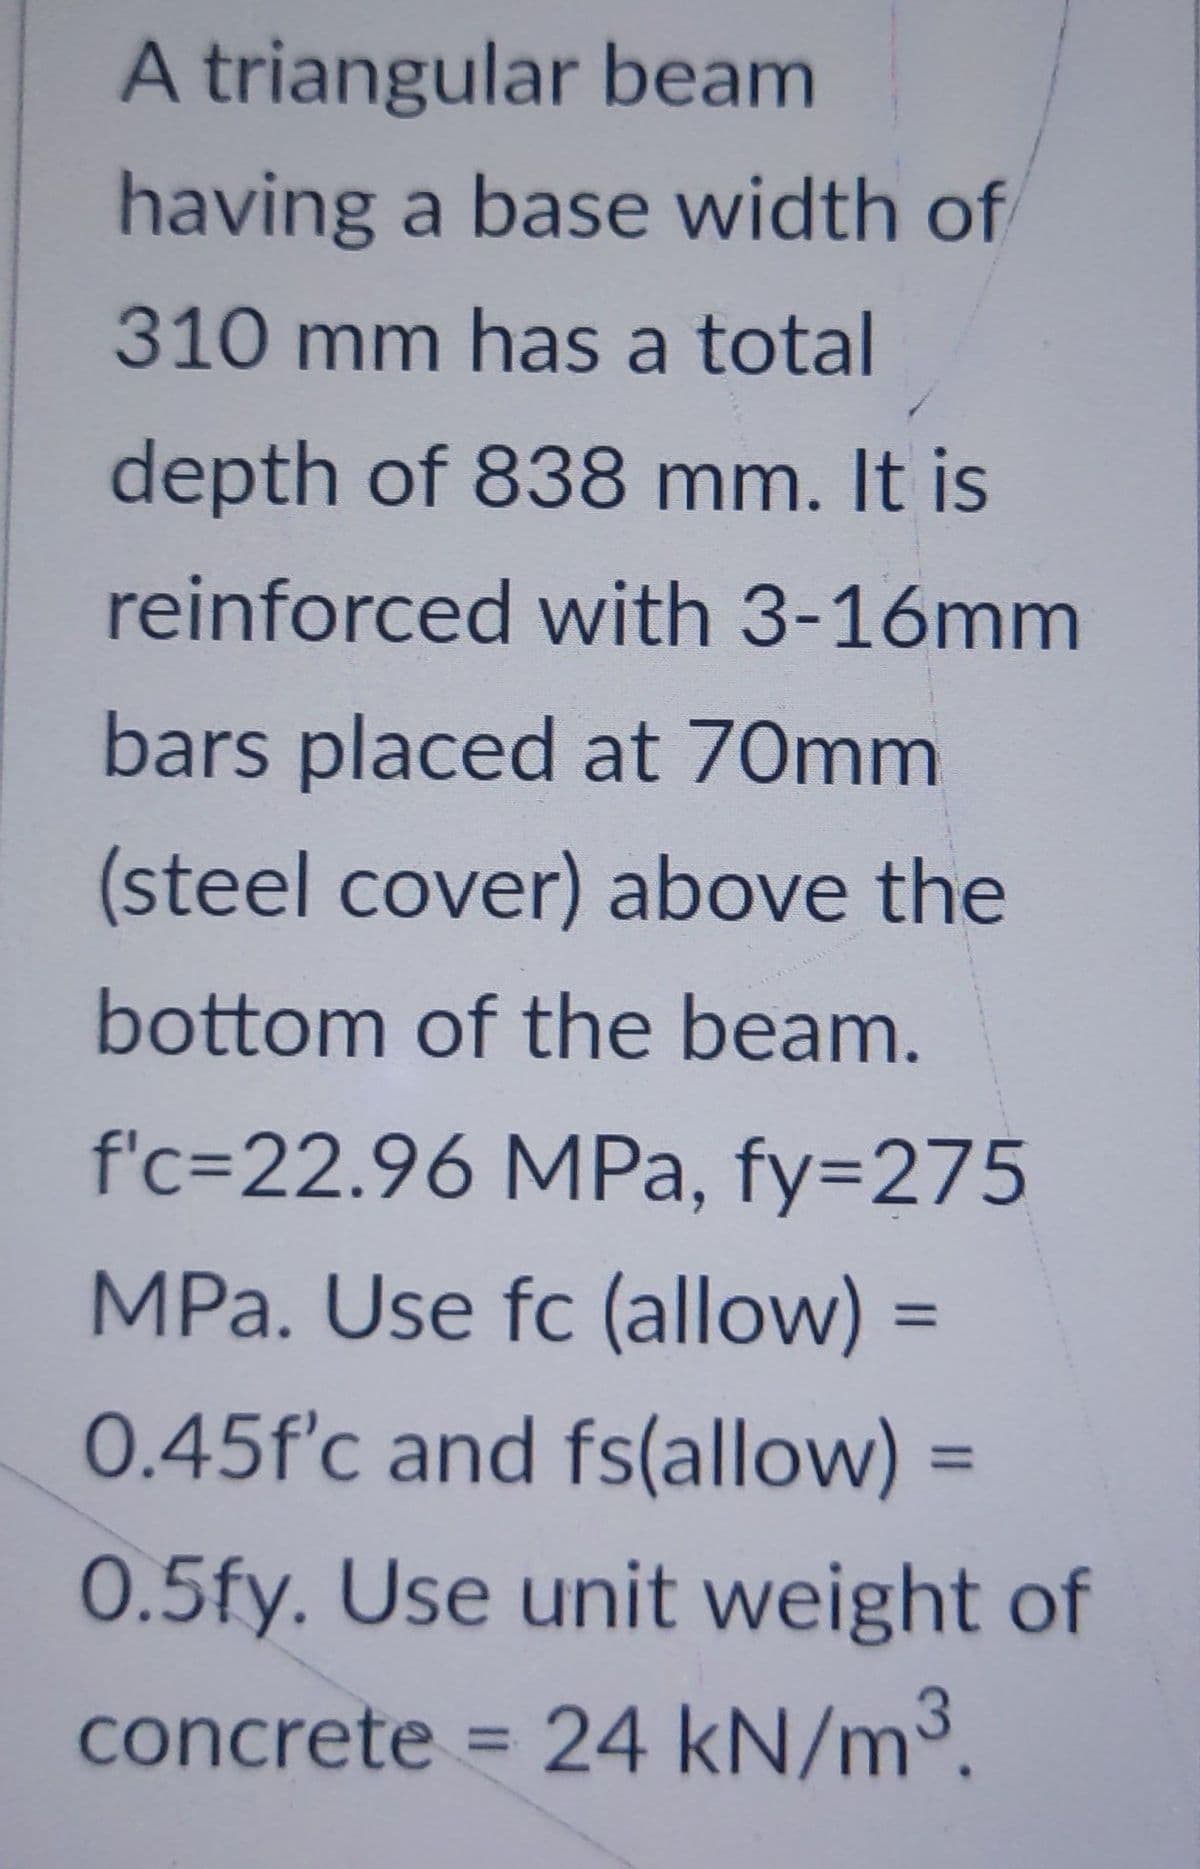 A triangular beam
having a base width of
310 mm has a total
depth of 838 mm. It is
reinforced with 3-16mm
bars placed at 70mm
(steel cover) above the
bottom of the beam.
f'c-22.96 MPa, fy=275
MPa. Use fc (allow) =
=
0.45f'c and fs(allow) =
0.5fy. Use unit weight of
concrete = 24 kN/m³.